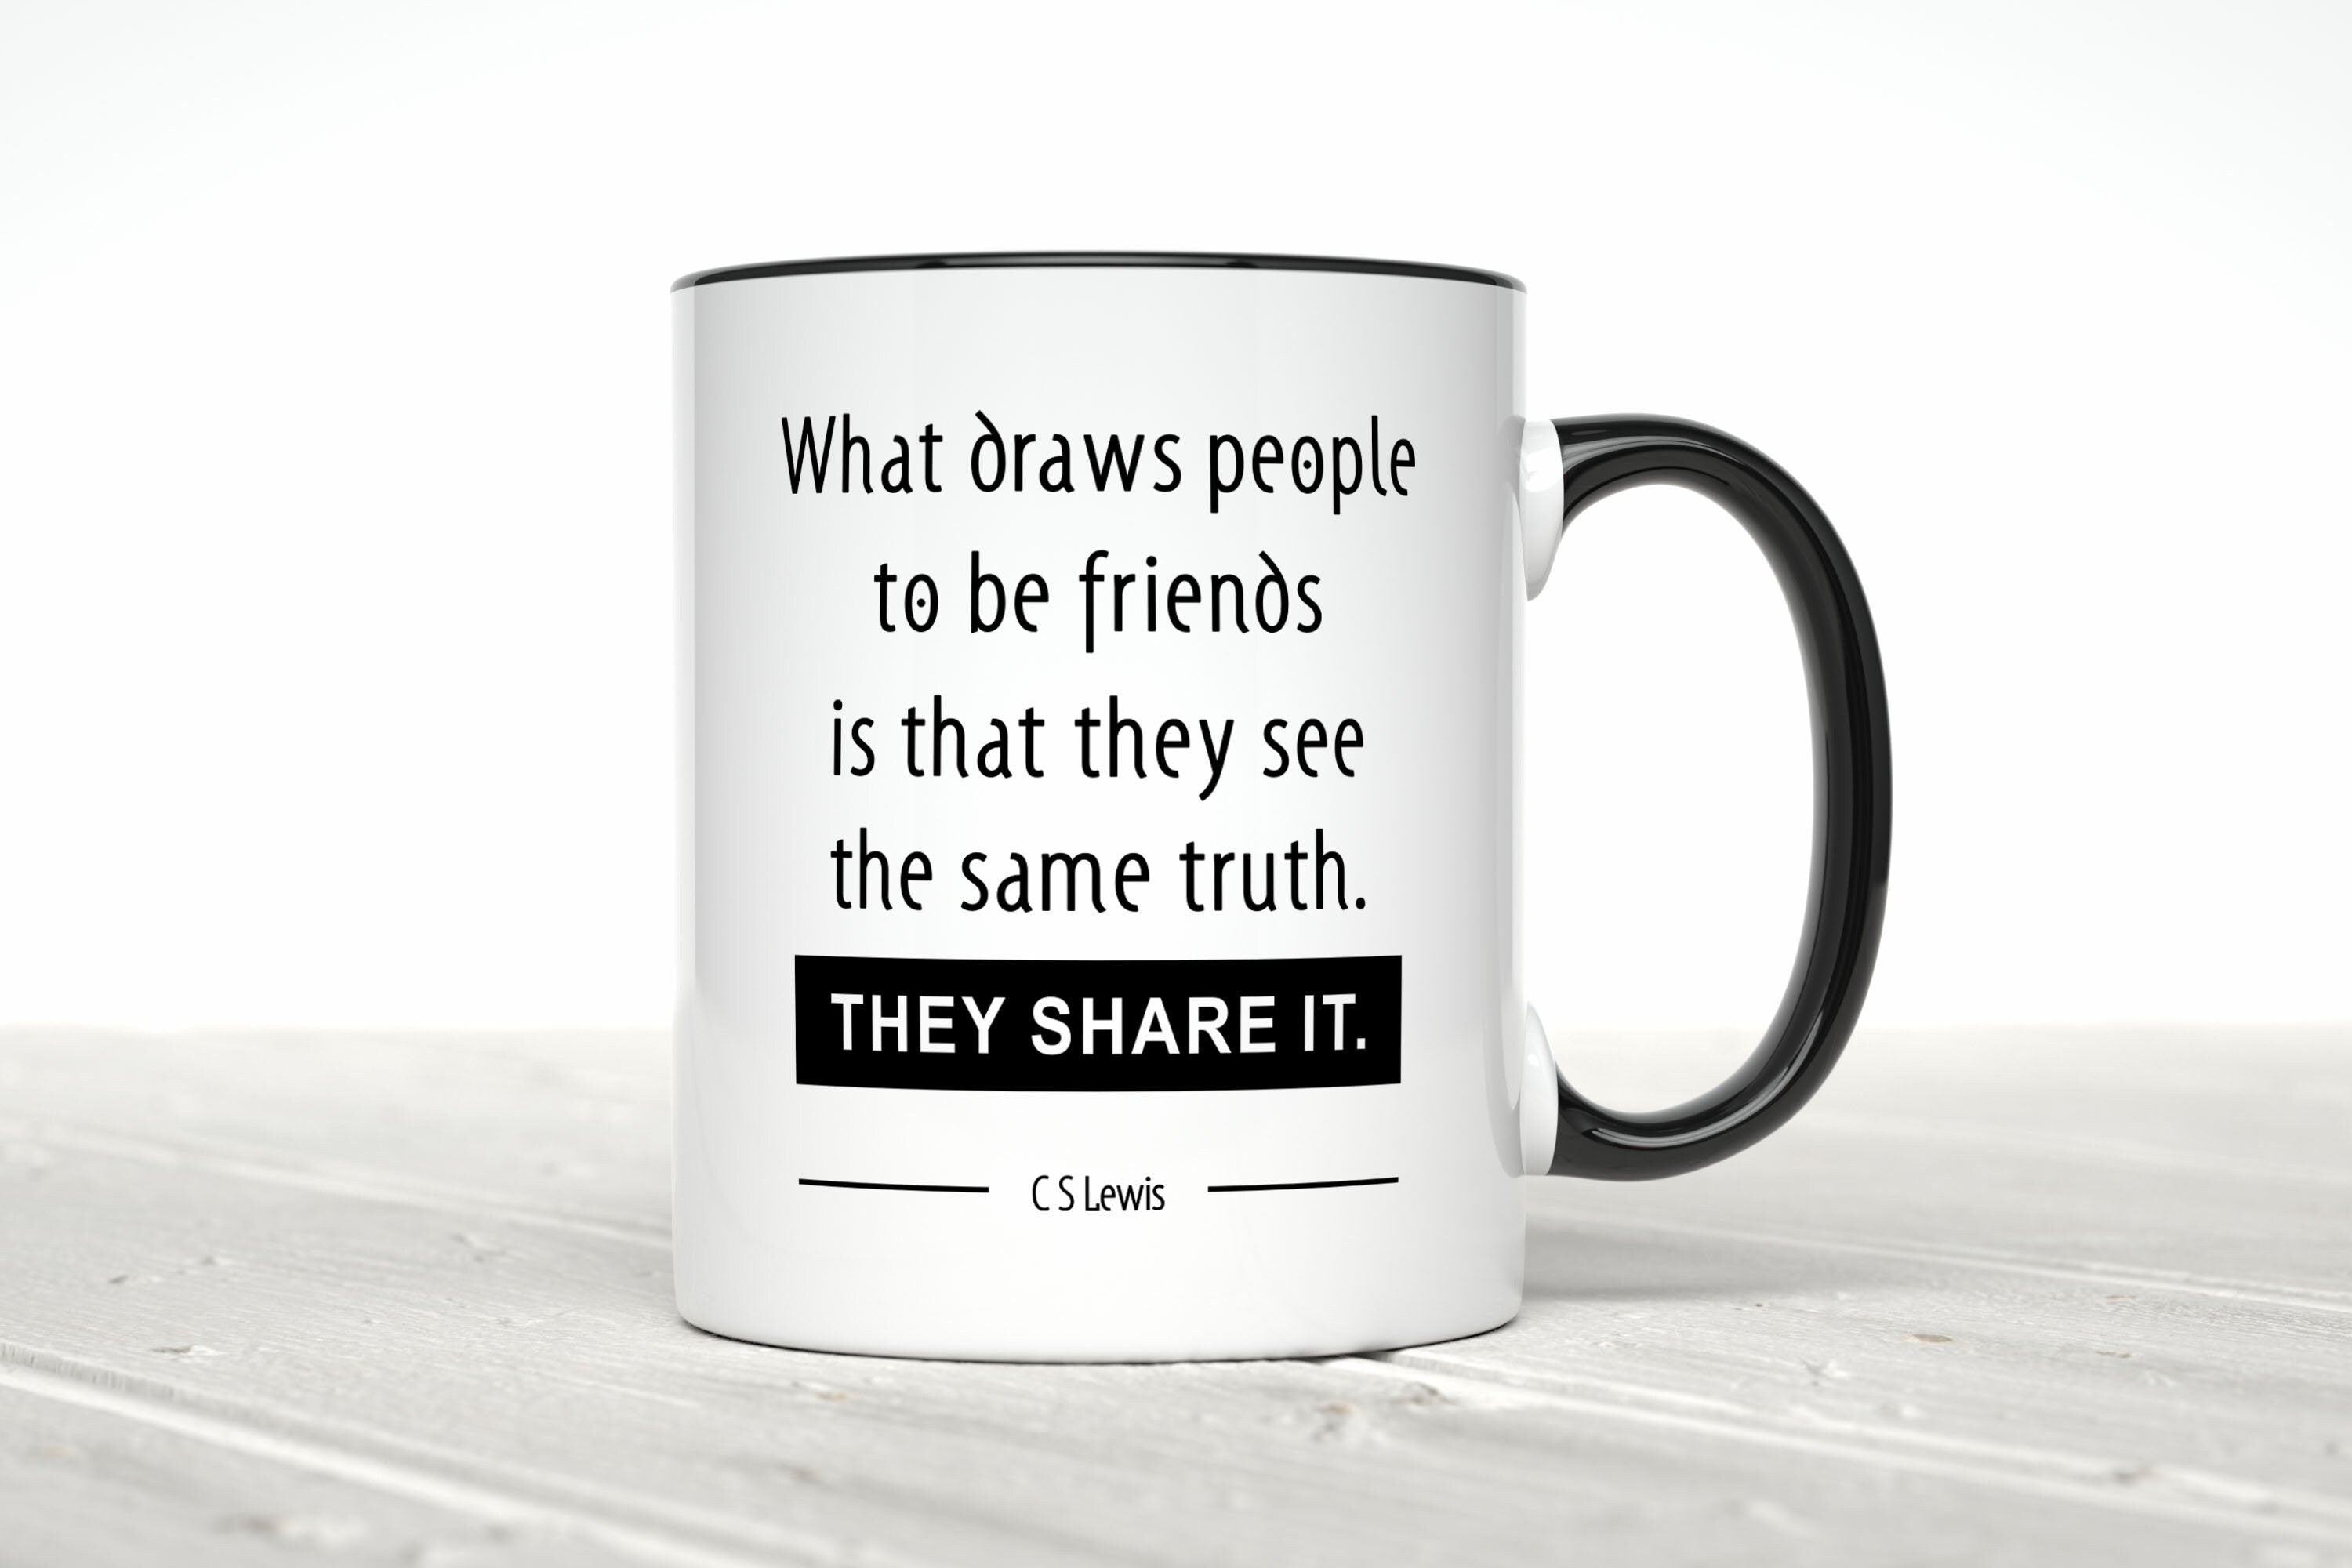 Black & White Friend Coffee Mug With C.S. Lewis Quote, What Draws People To Be Friends Is That They See The Same Truth